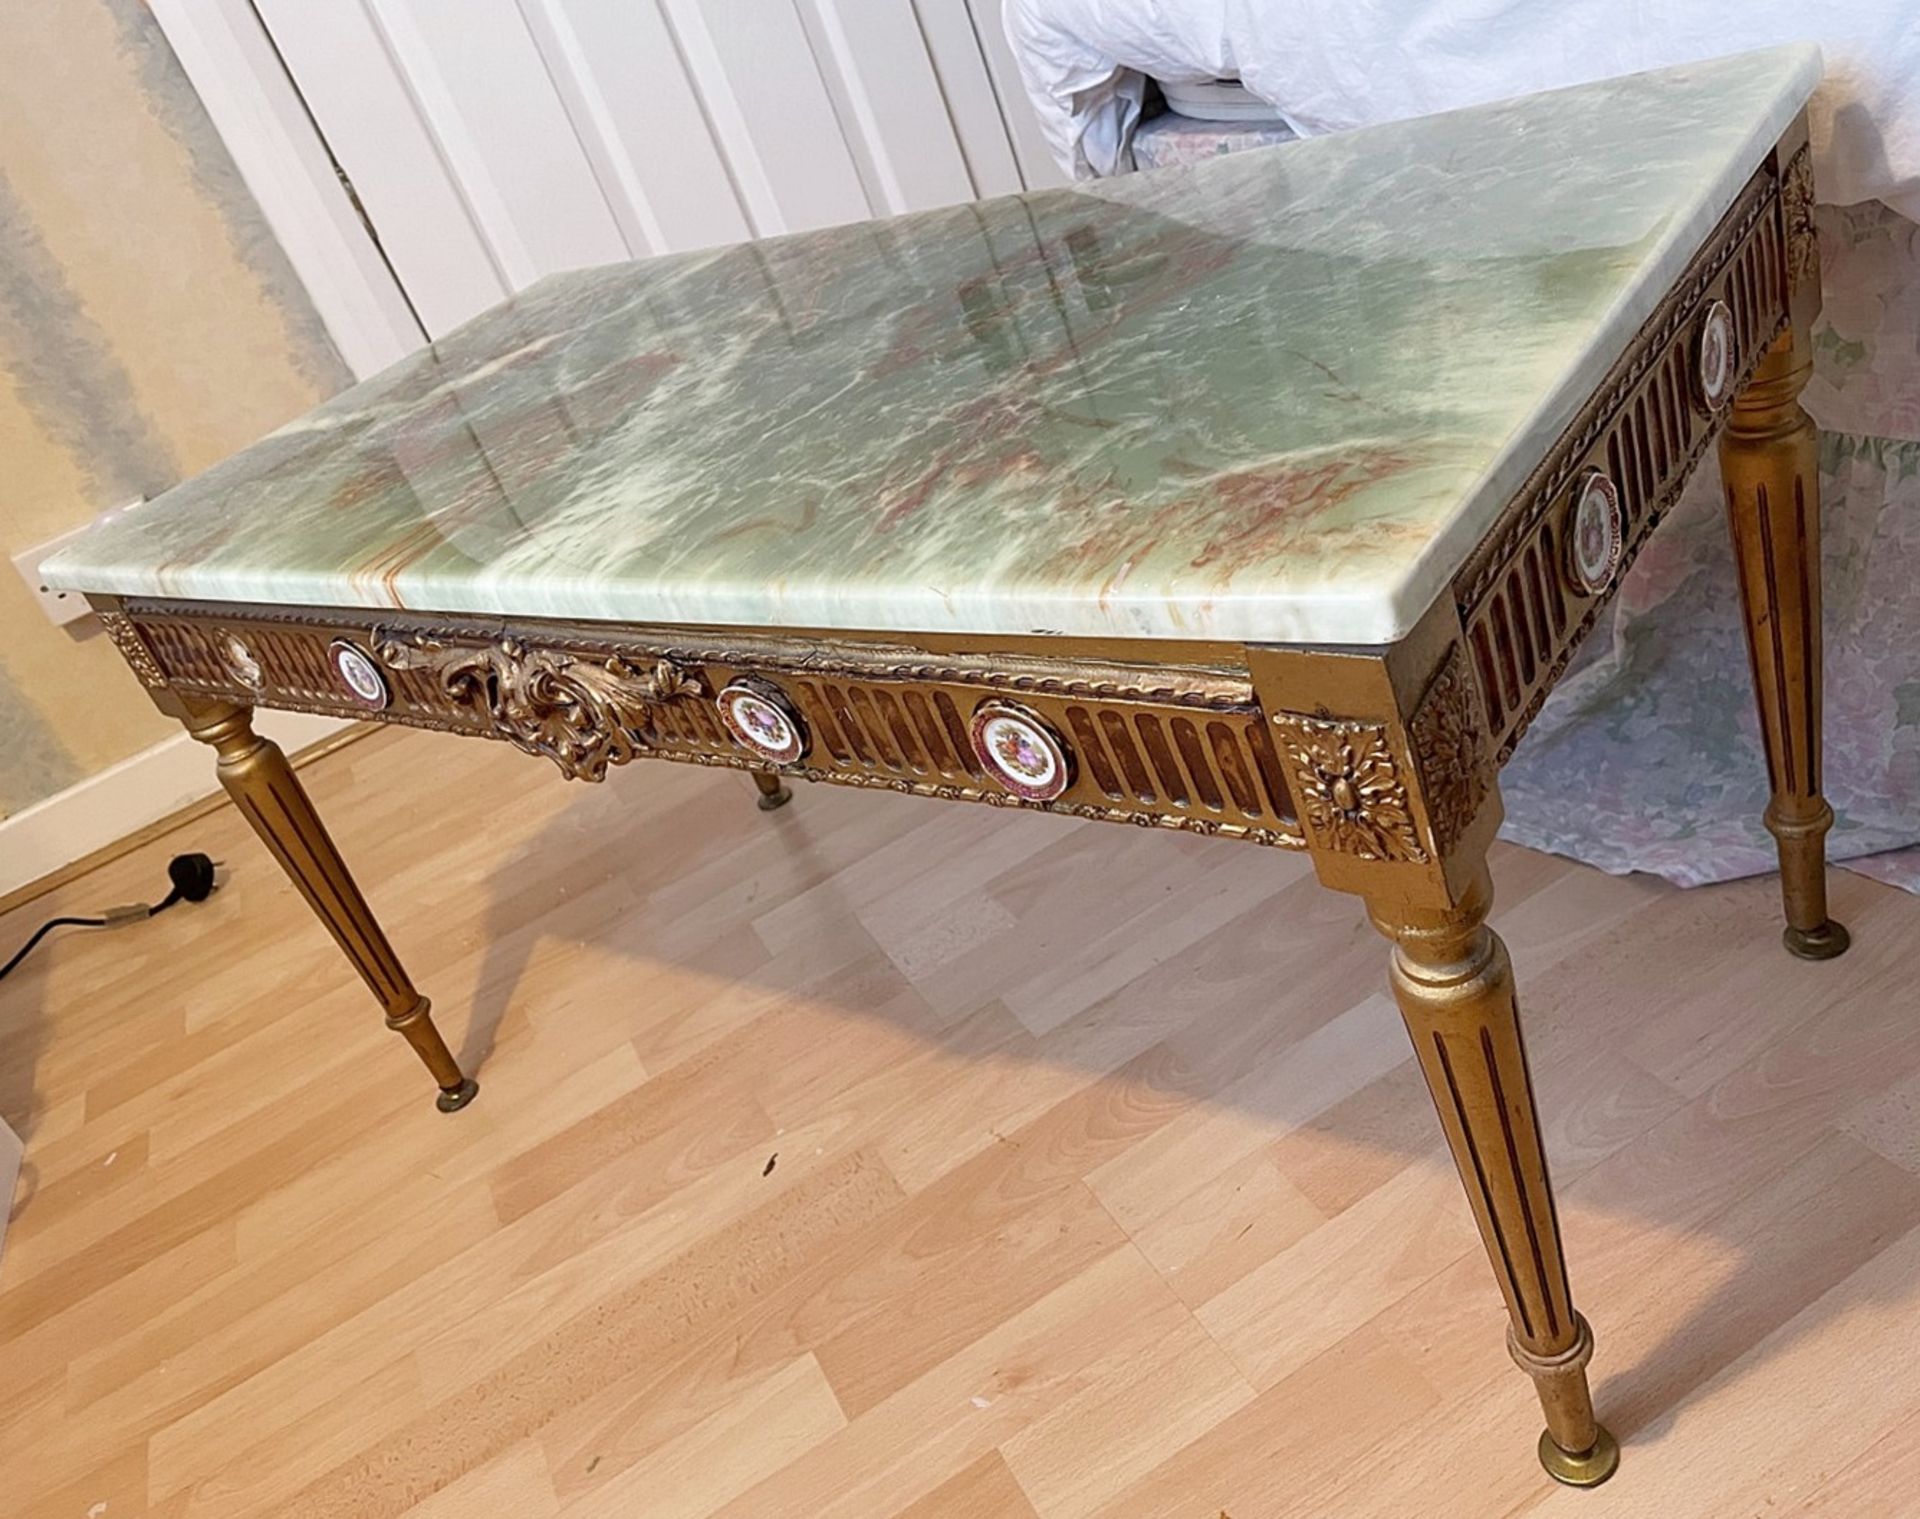 1 x Rectangular Period-style Marble Topped Table - From An Exclusive Property In Leeds - No VAT on